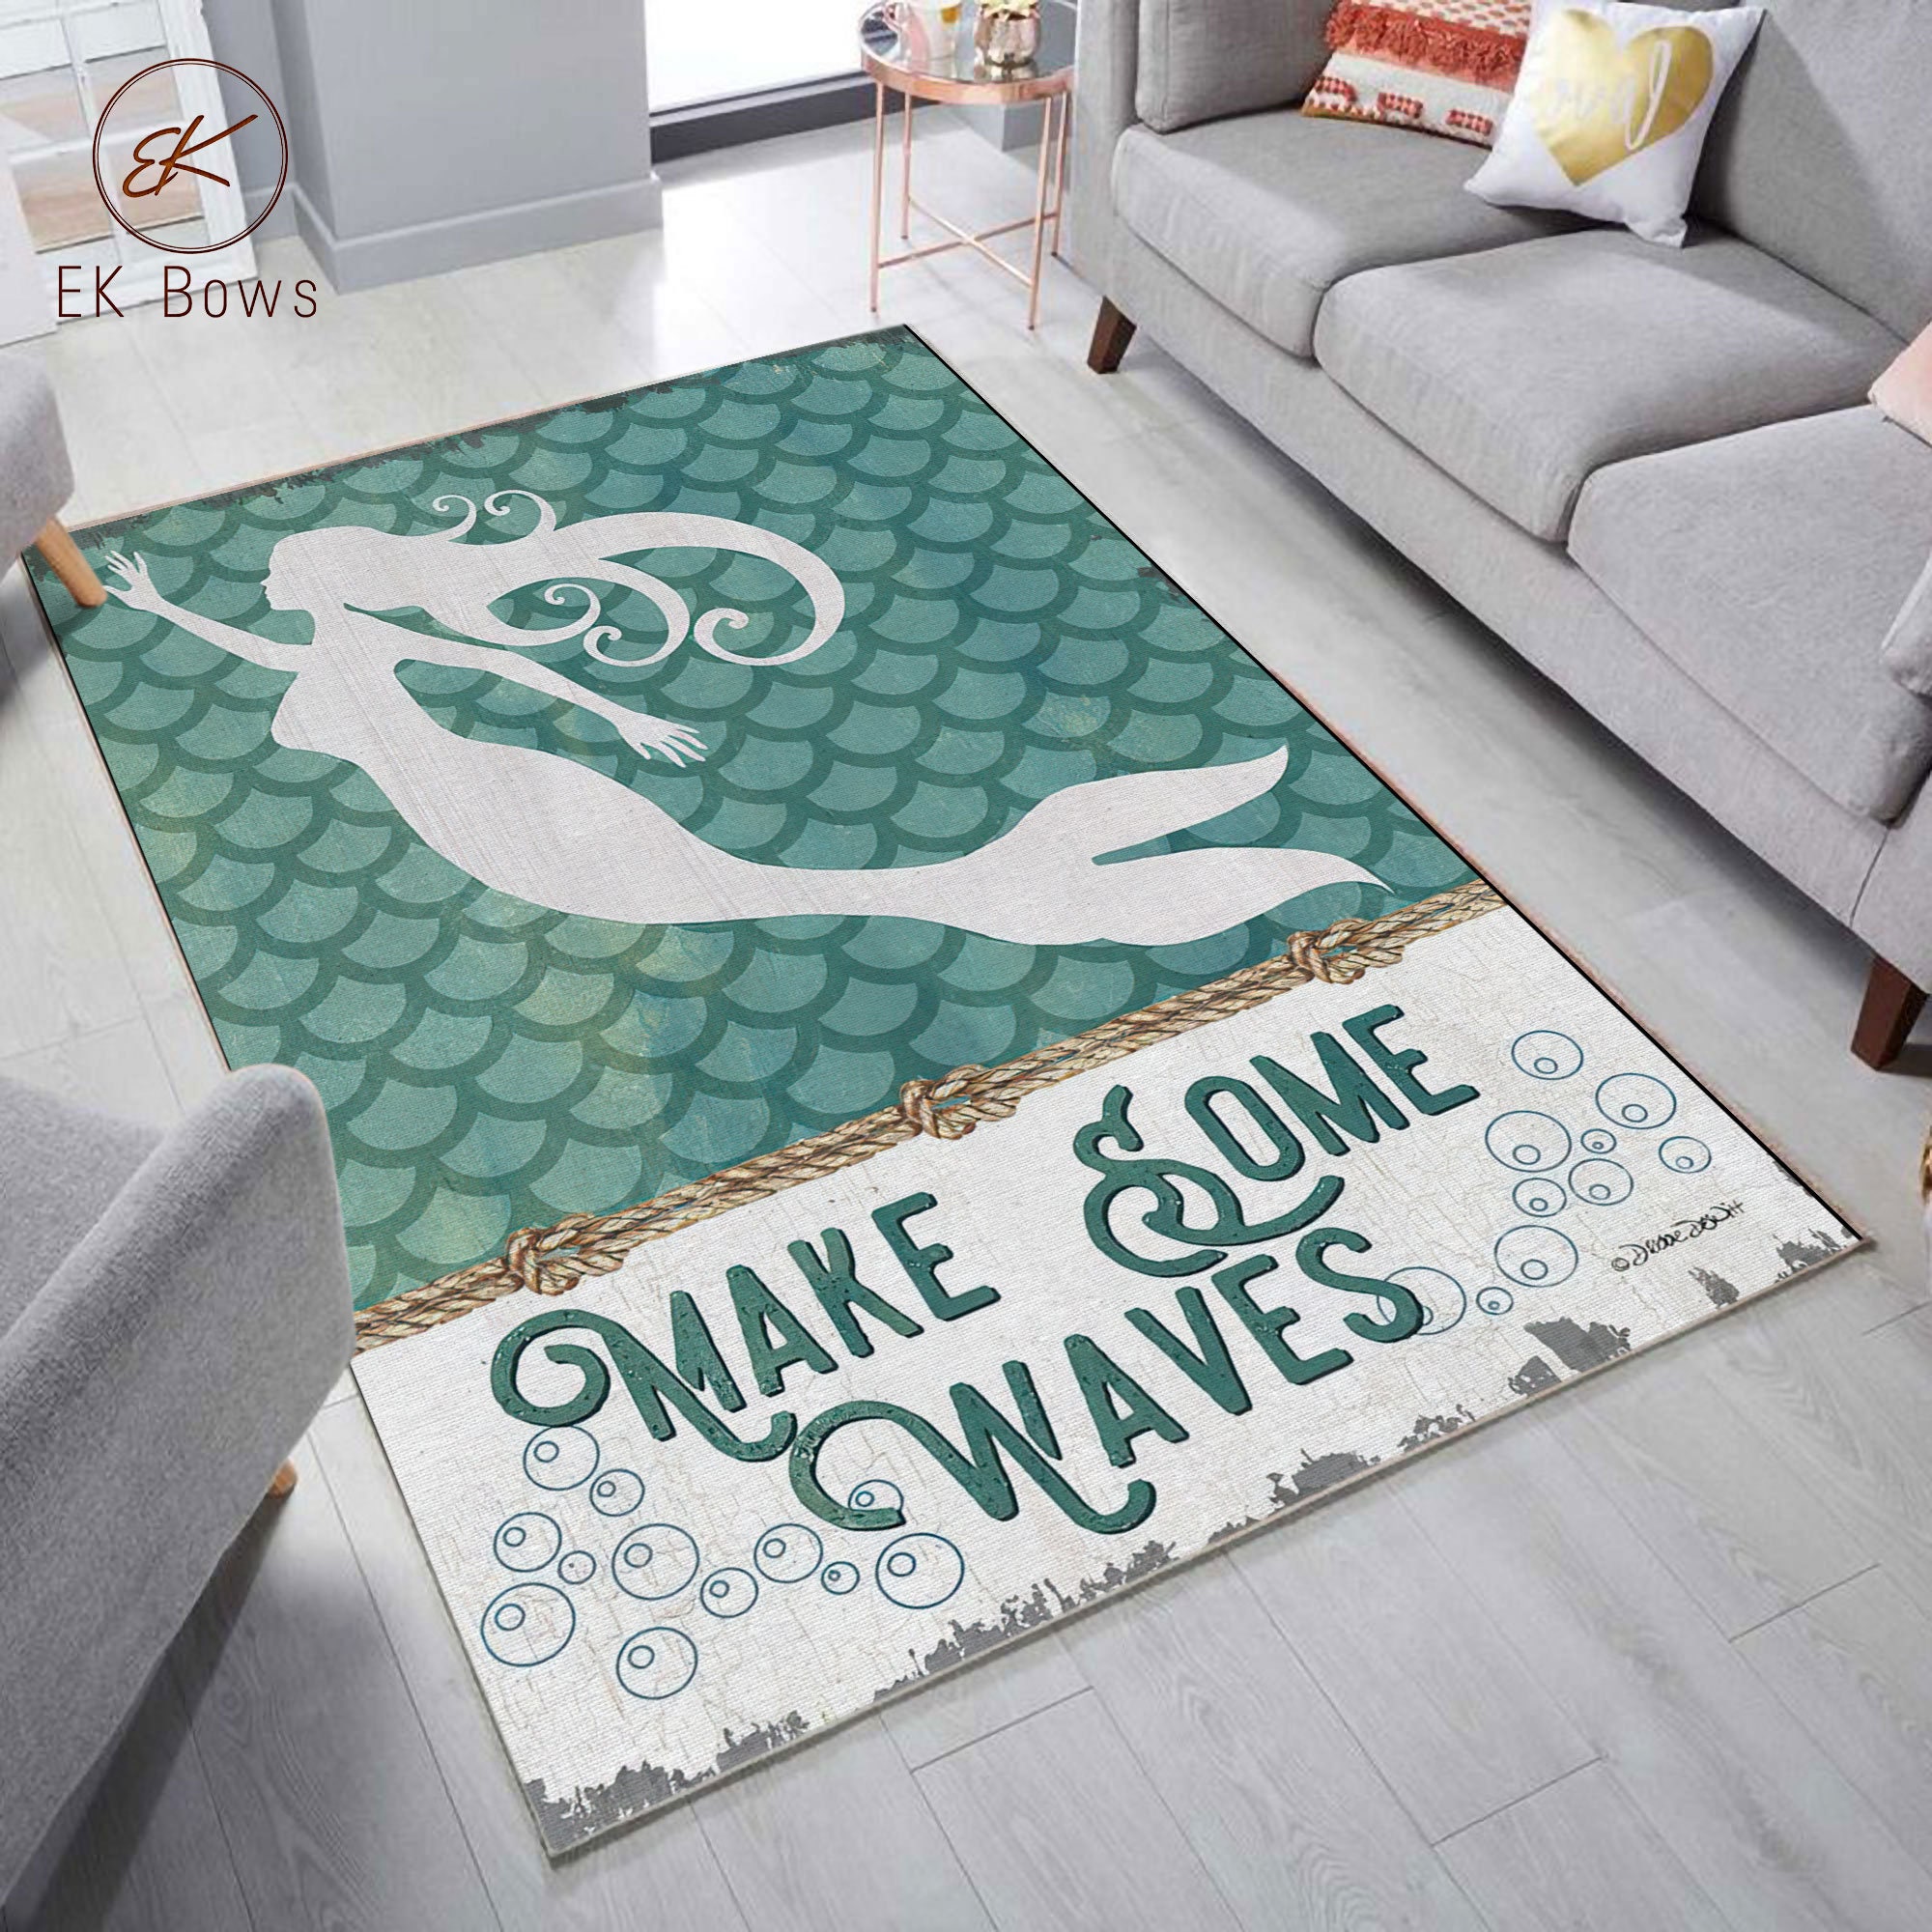 HVEST Mermaid Area Rug Cute Girl with Fish Under The Sea Round Rugs Fairy Tale Carpet Non-Slip Soft Yoga Kids Play Pet Floor Mat for Bedroom Living Room, Diameter:27 